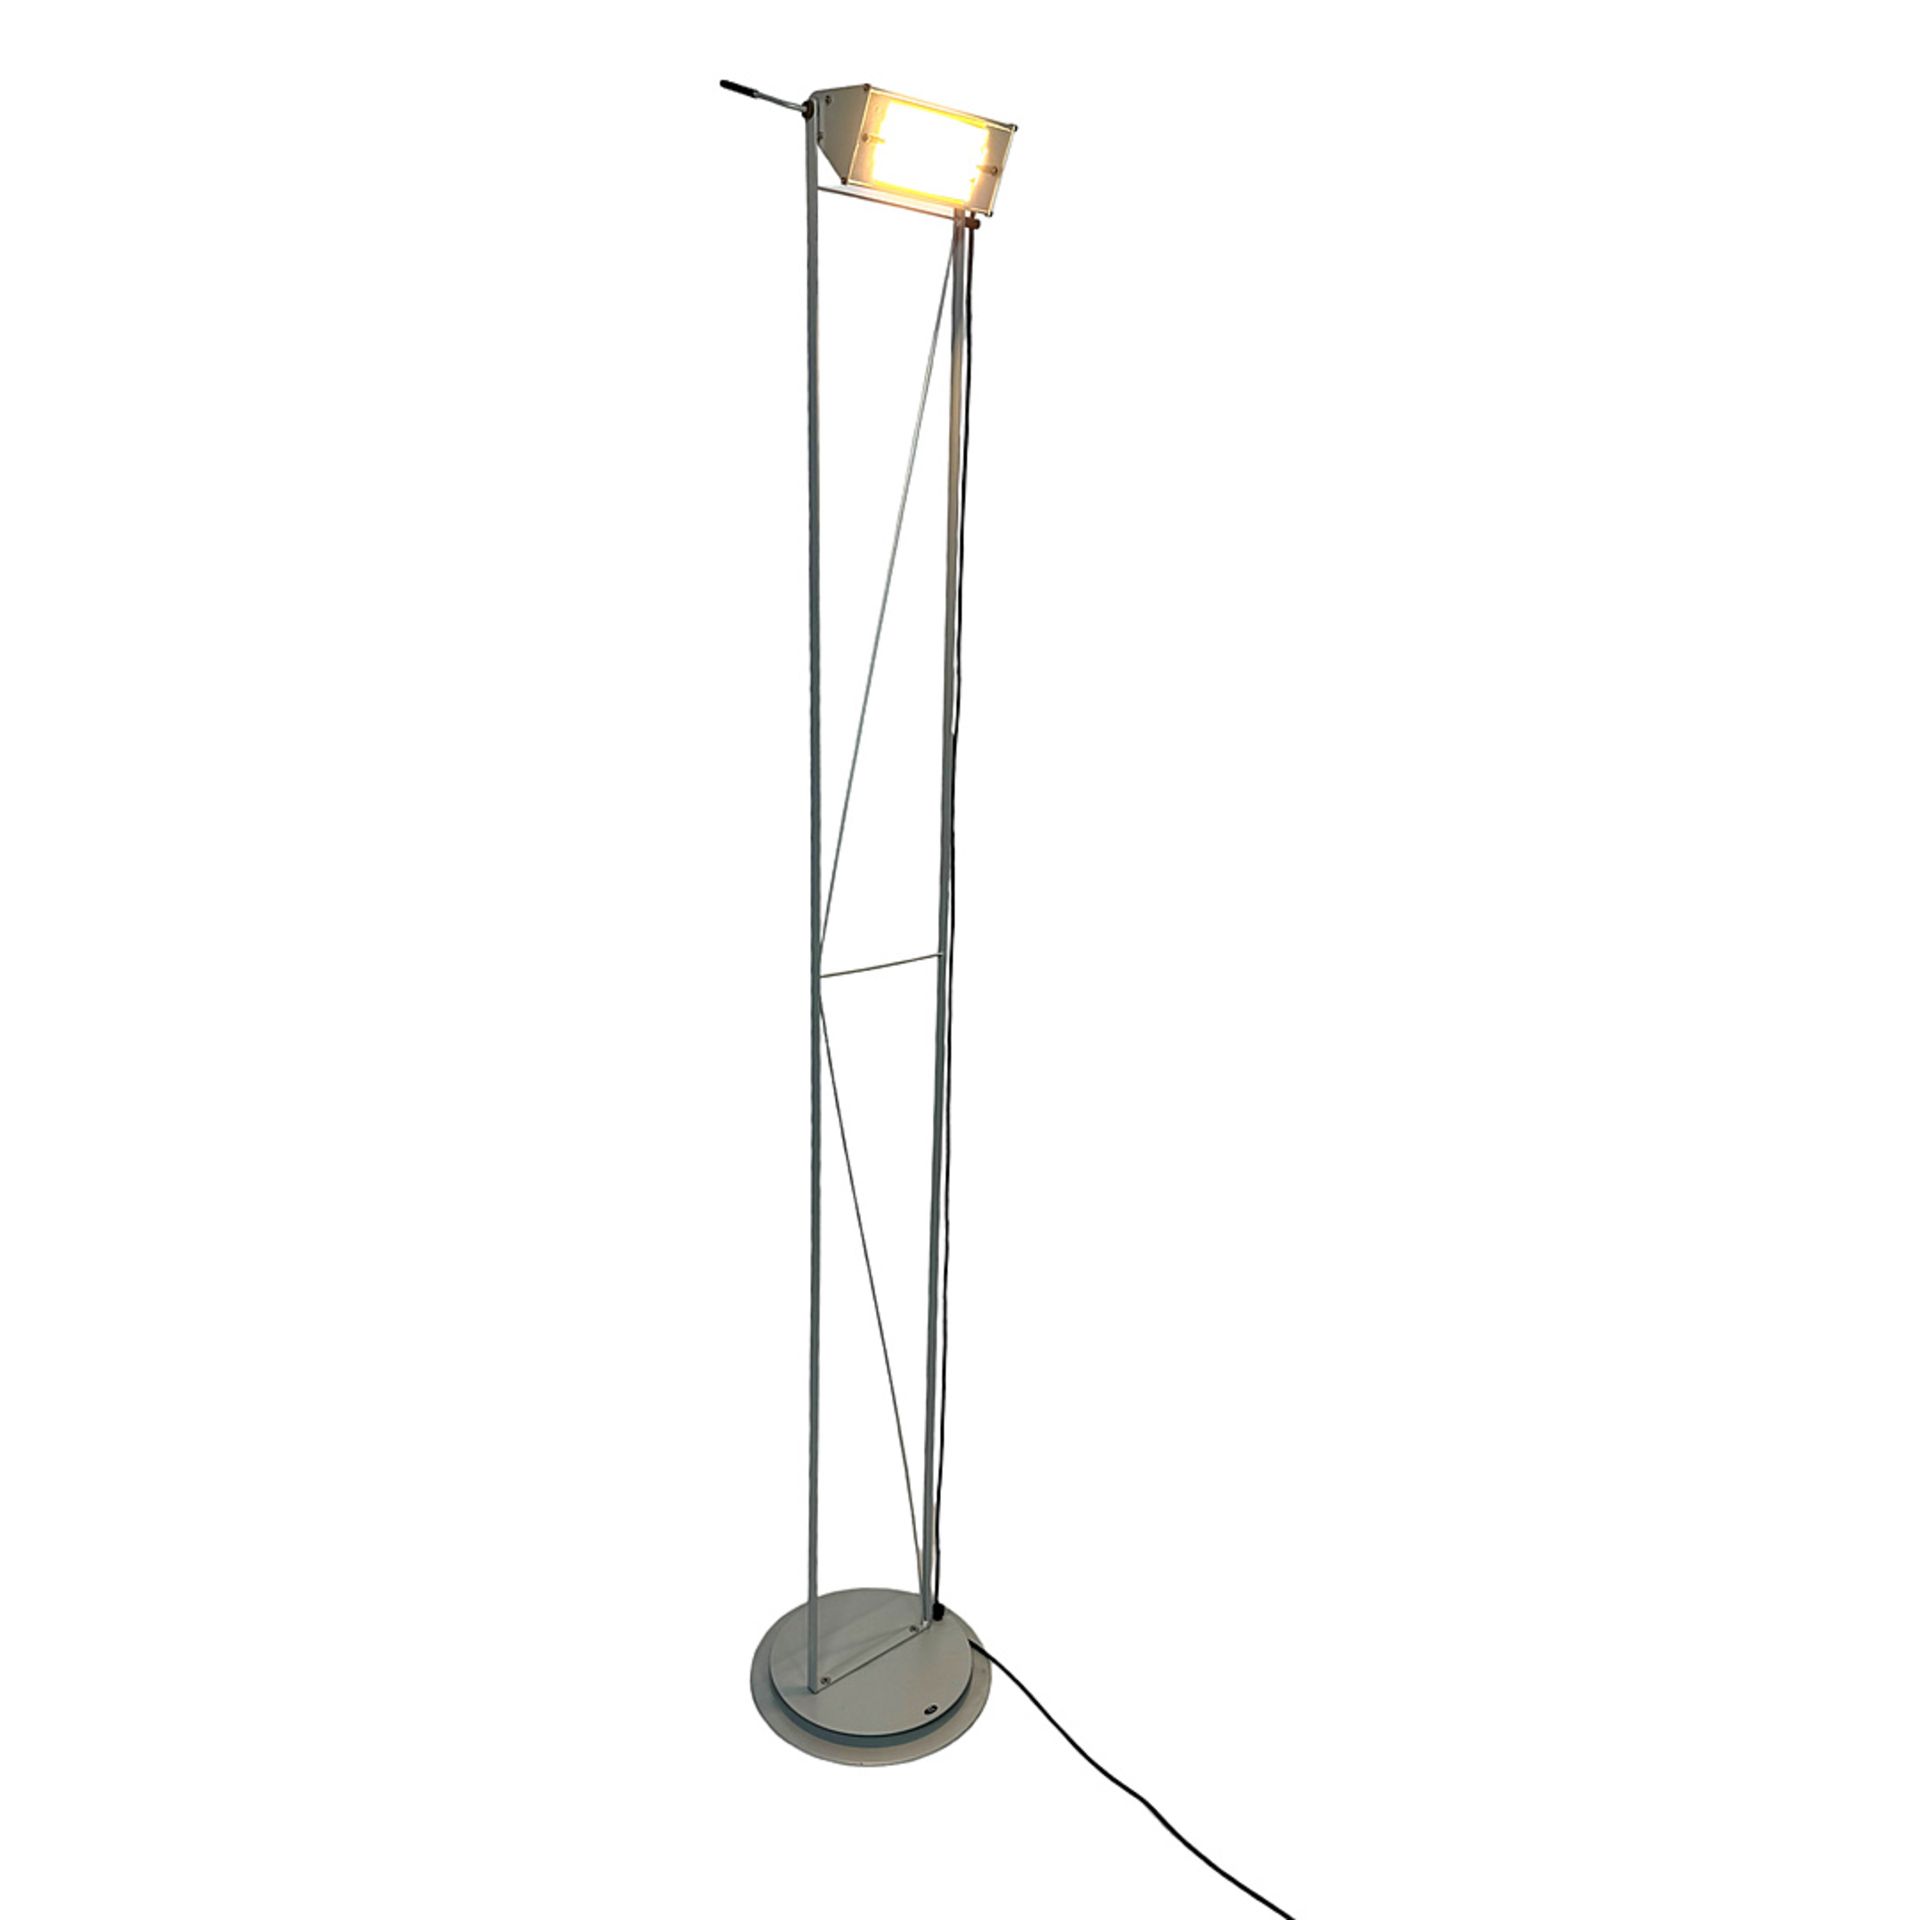 Walter Monici and Paolo Salvo for Lumina Works, Milan floor lamp model Opus, late 20th century